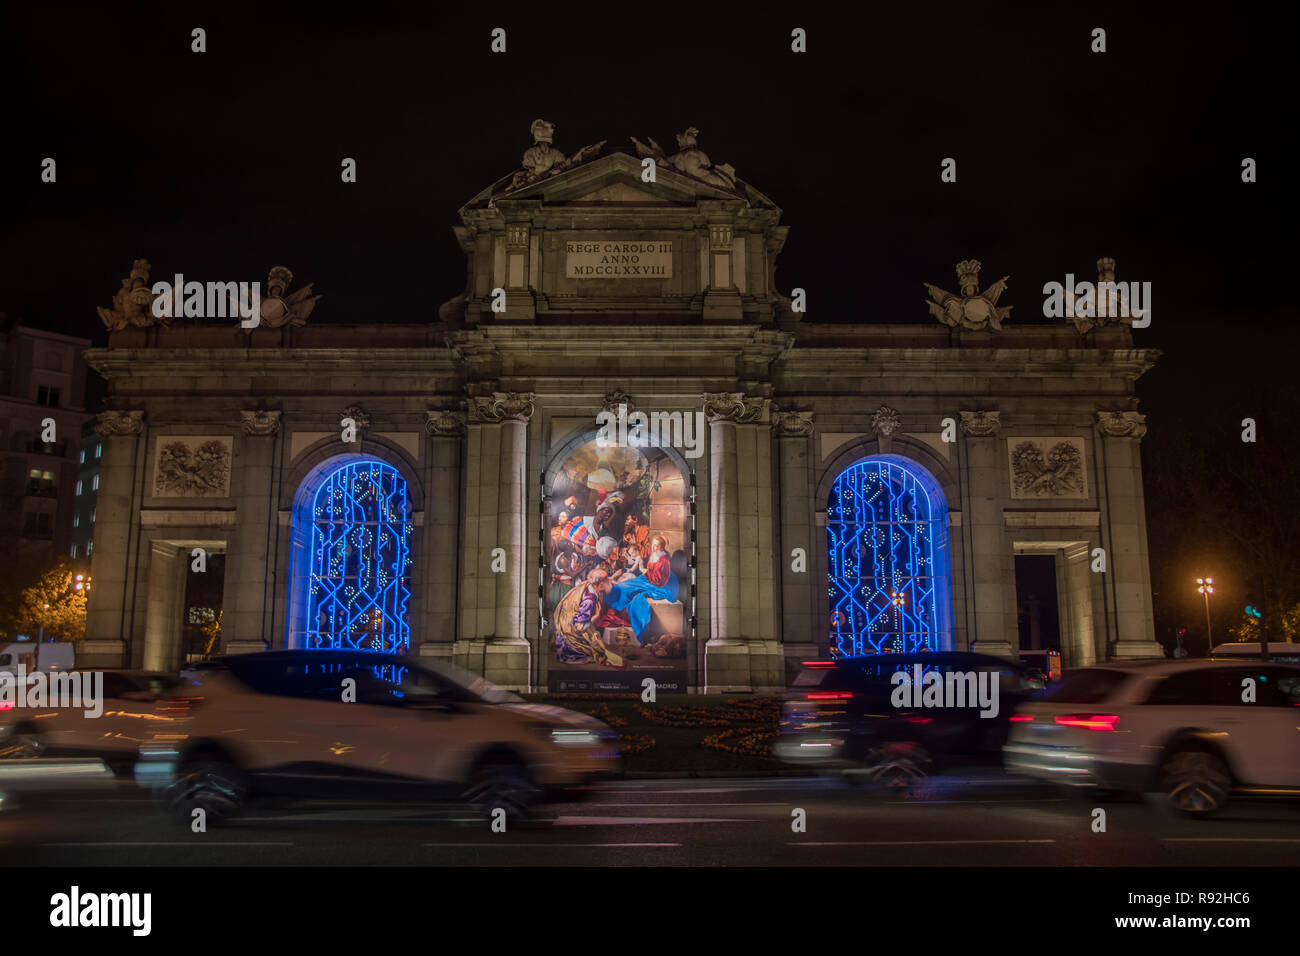 Madrid, Spain. 18th December, 2018. Big painting of ¨Belen¨in the principal avenue of Madrid, Spain Alcala. a wide angle picture of the painting in la puerta de alcala. a wide angle picture of the painting in front of la puerta de alcala Credit: Alberto Sibaja Ramírez/Alamy Live News Stock Photo